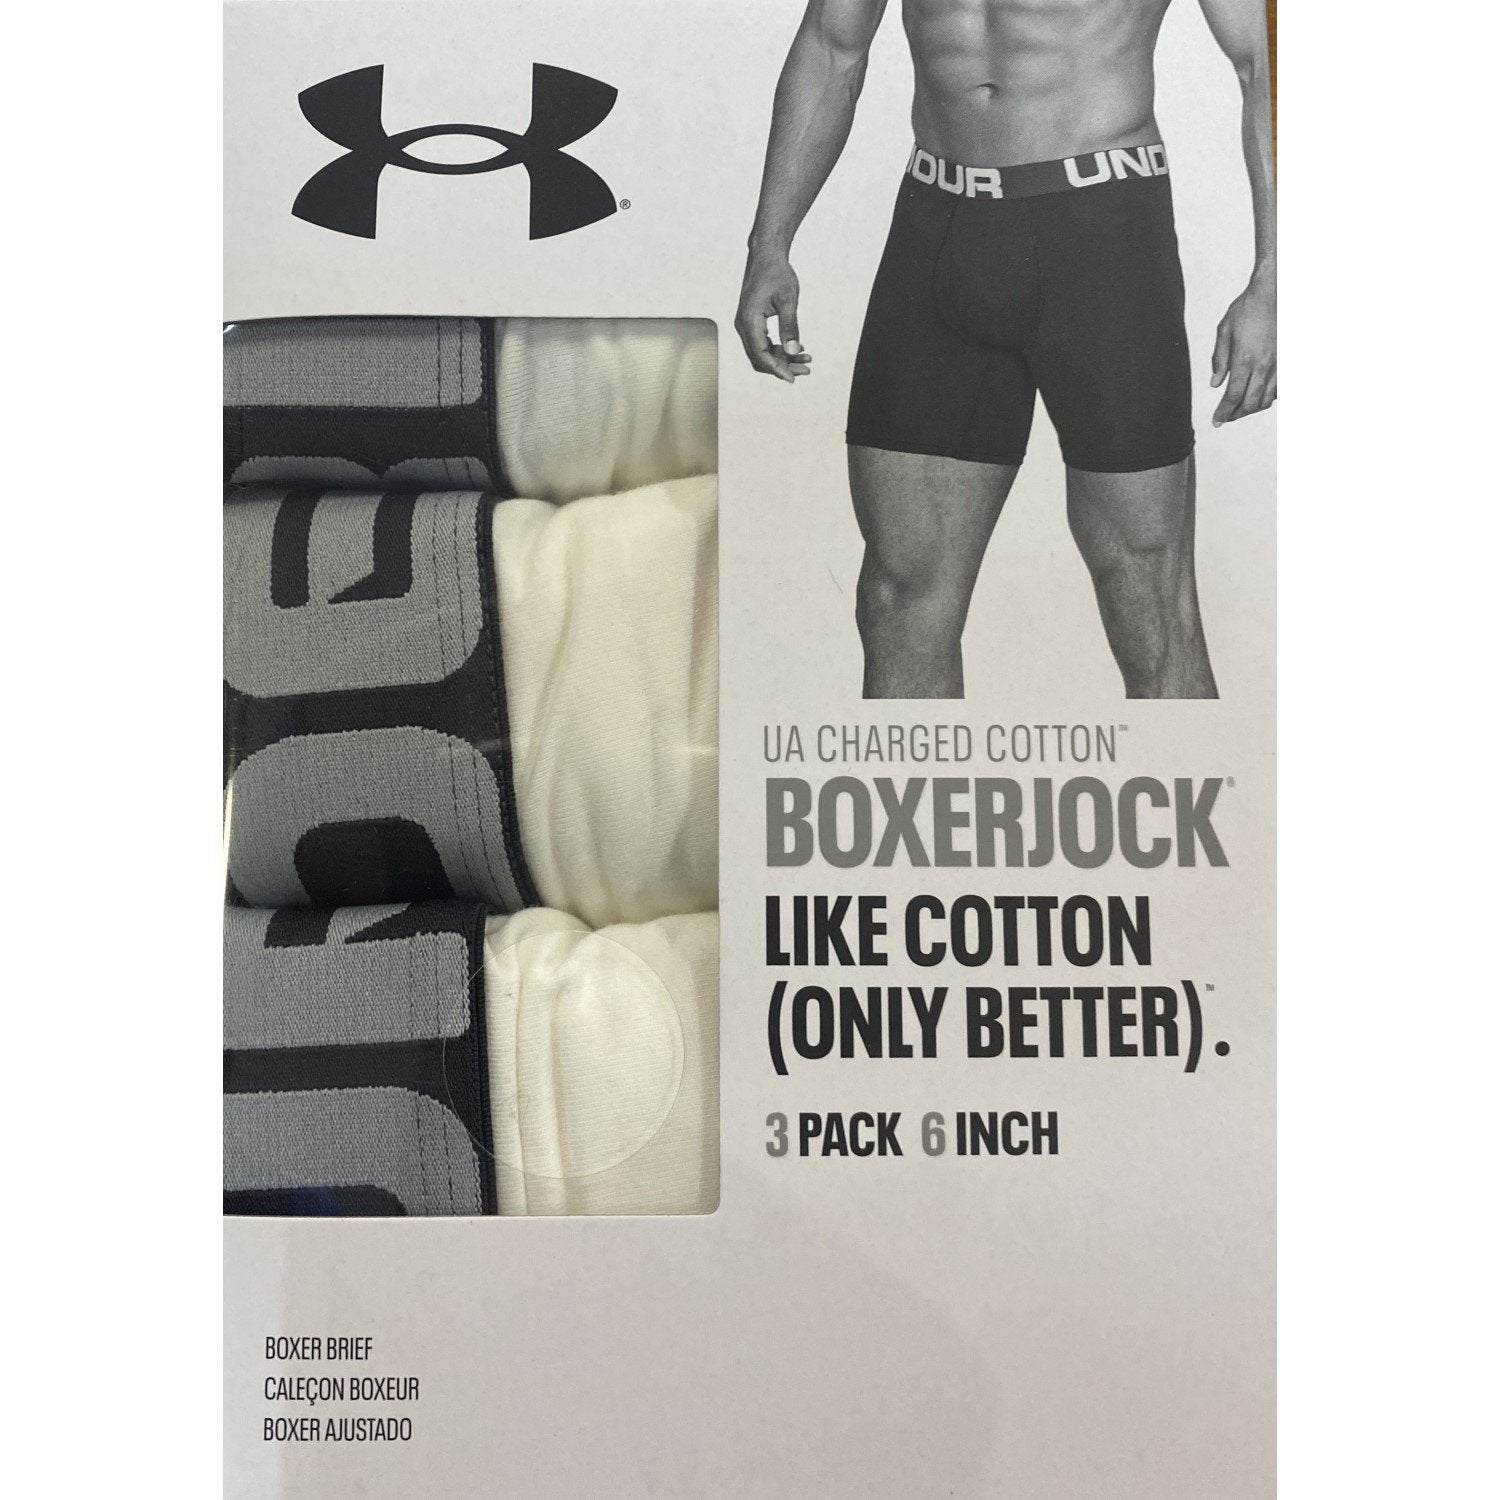 Under Armour Boxerjock Charged Cotton 3 Pack 6” Inseam Men’s Large Black New